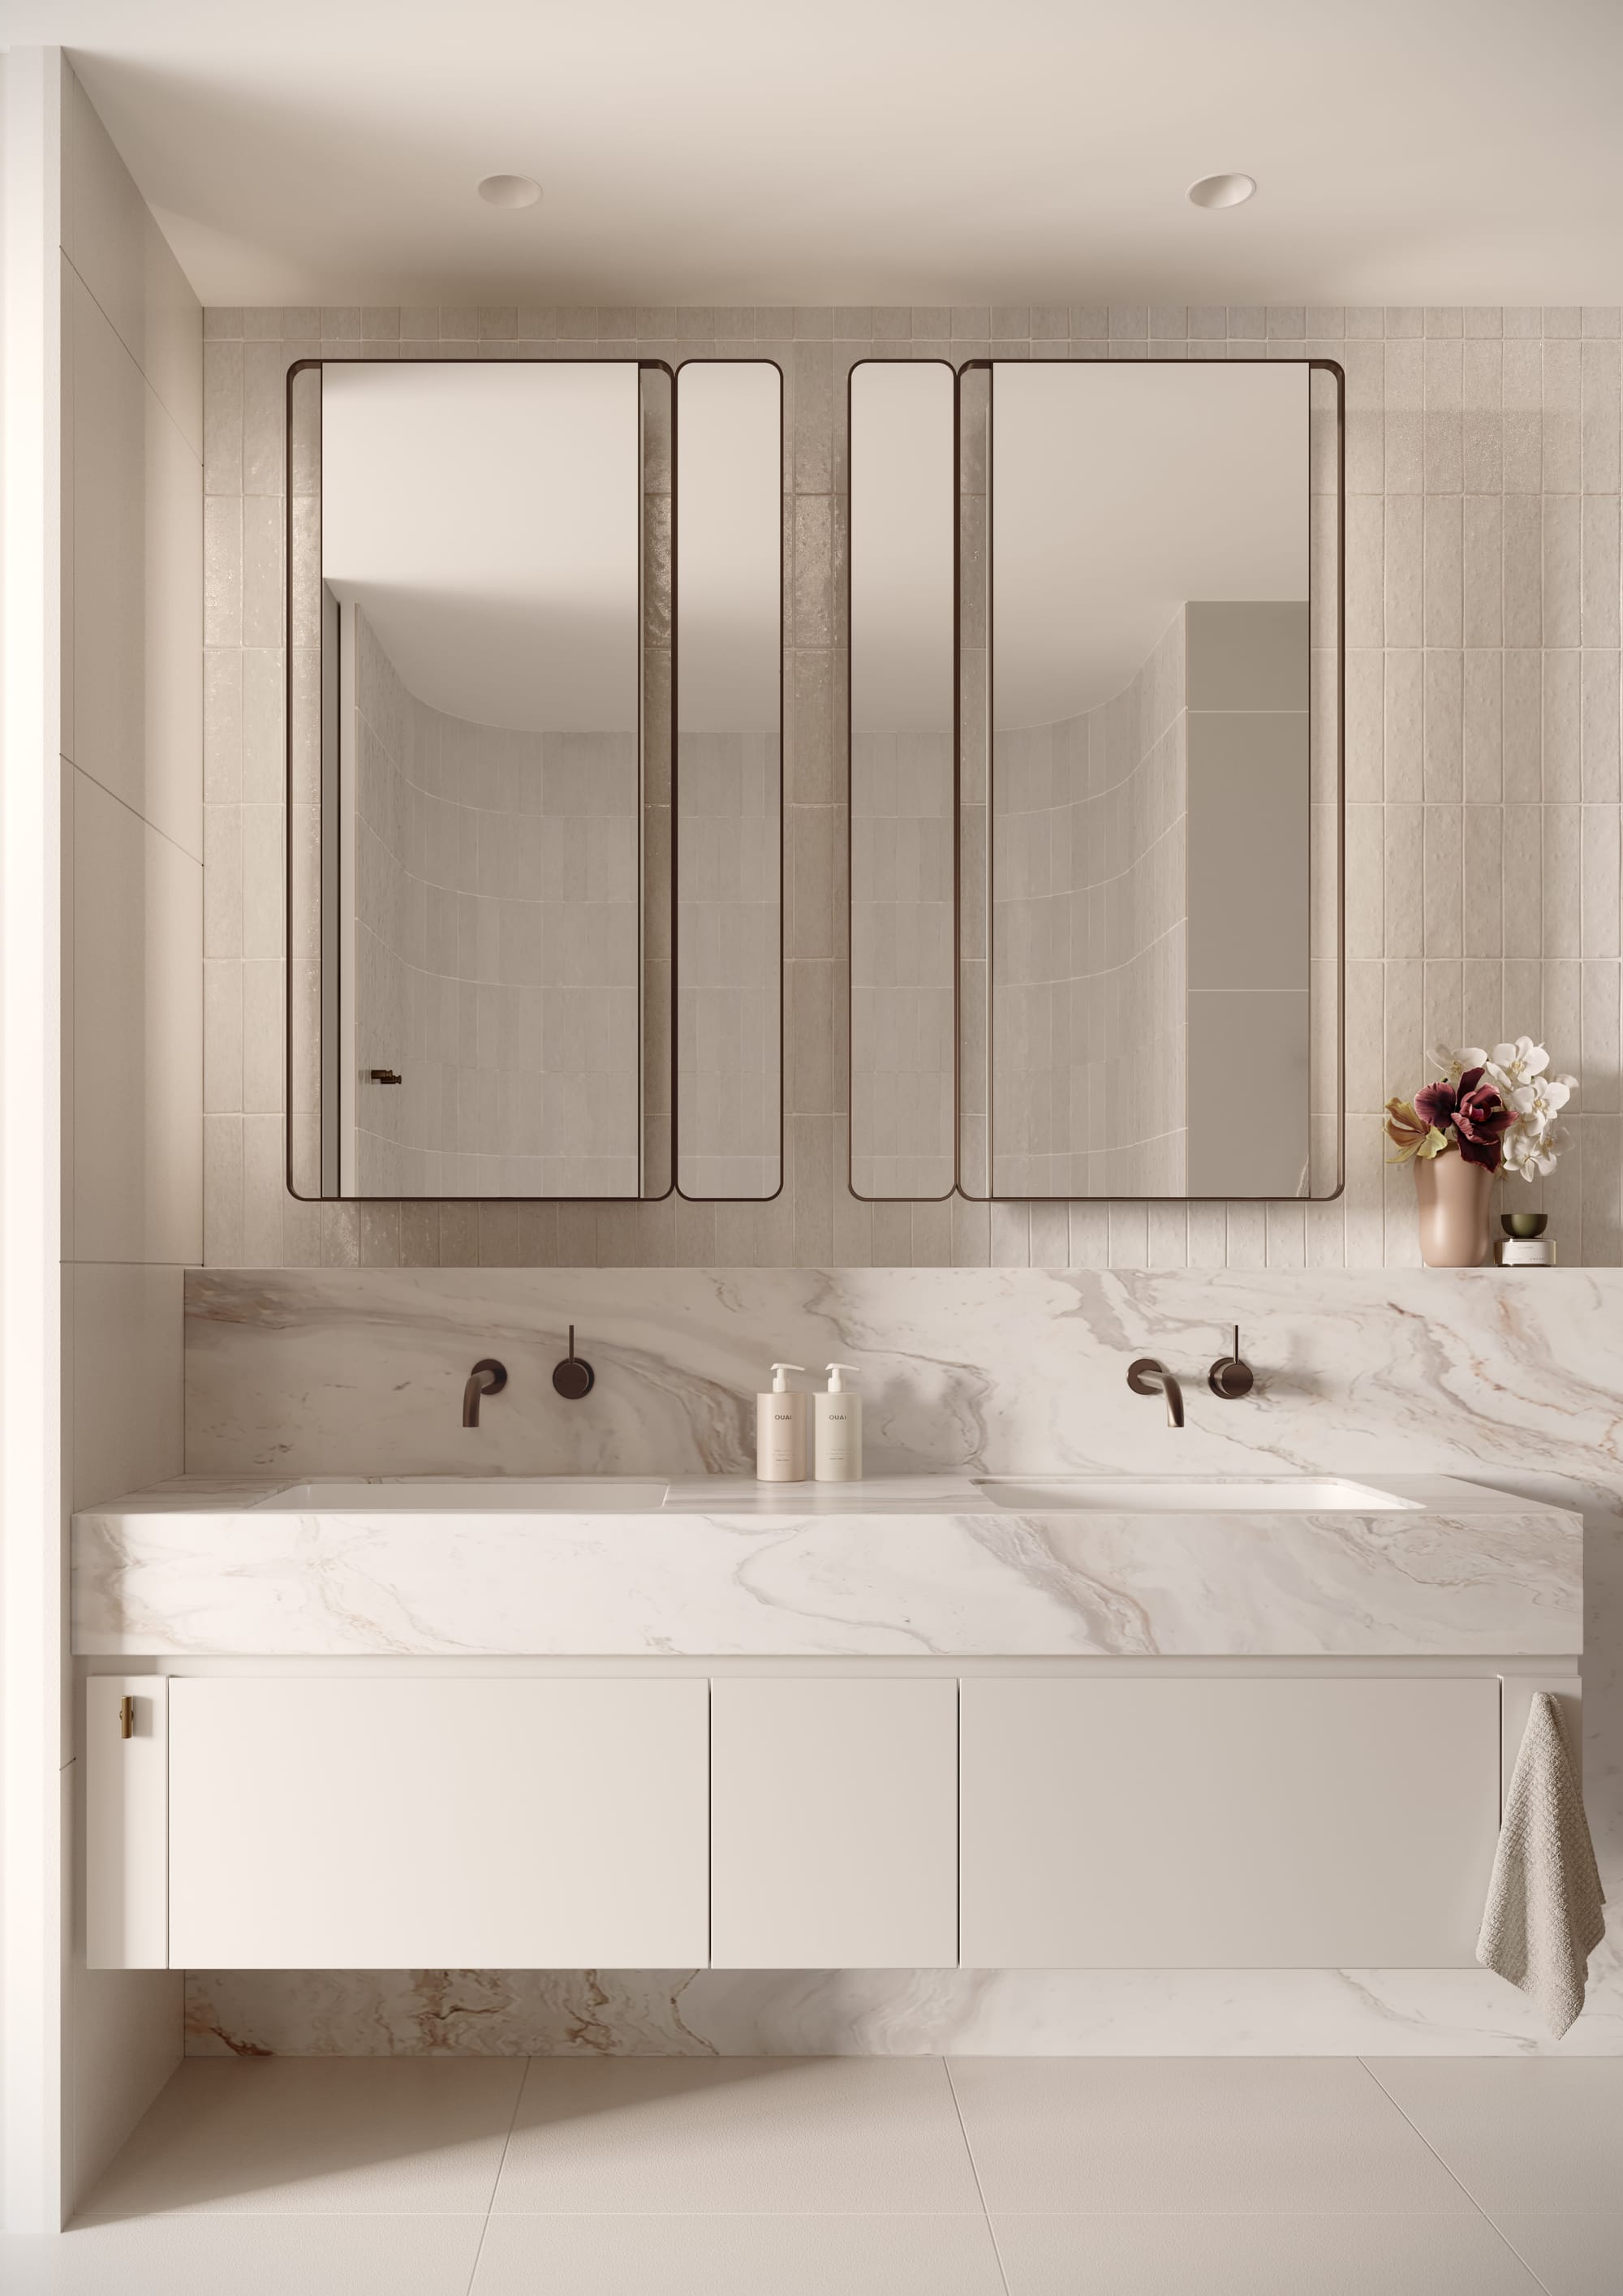 Sculpt Hawthorn by Mim Design, Parallel Workshop and Jack Merlo. Render copyright of Studio Piper. Bathroom with double vanity with hanging mirrors. Marble countertops and splashback. Brass tapware.